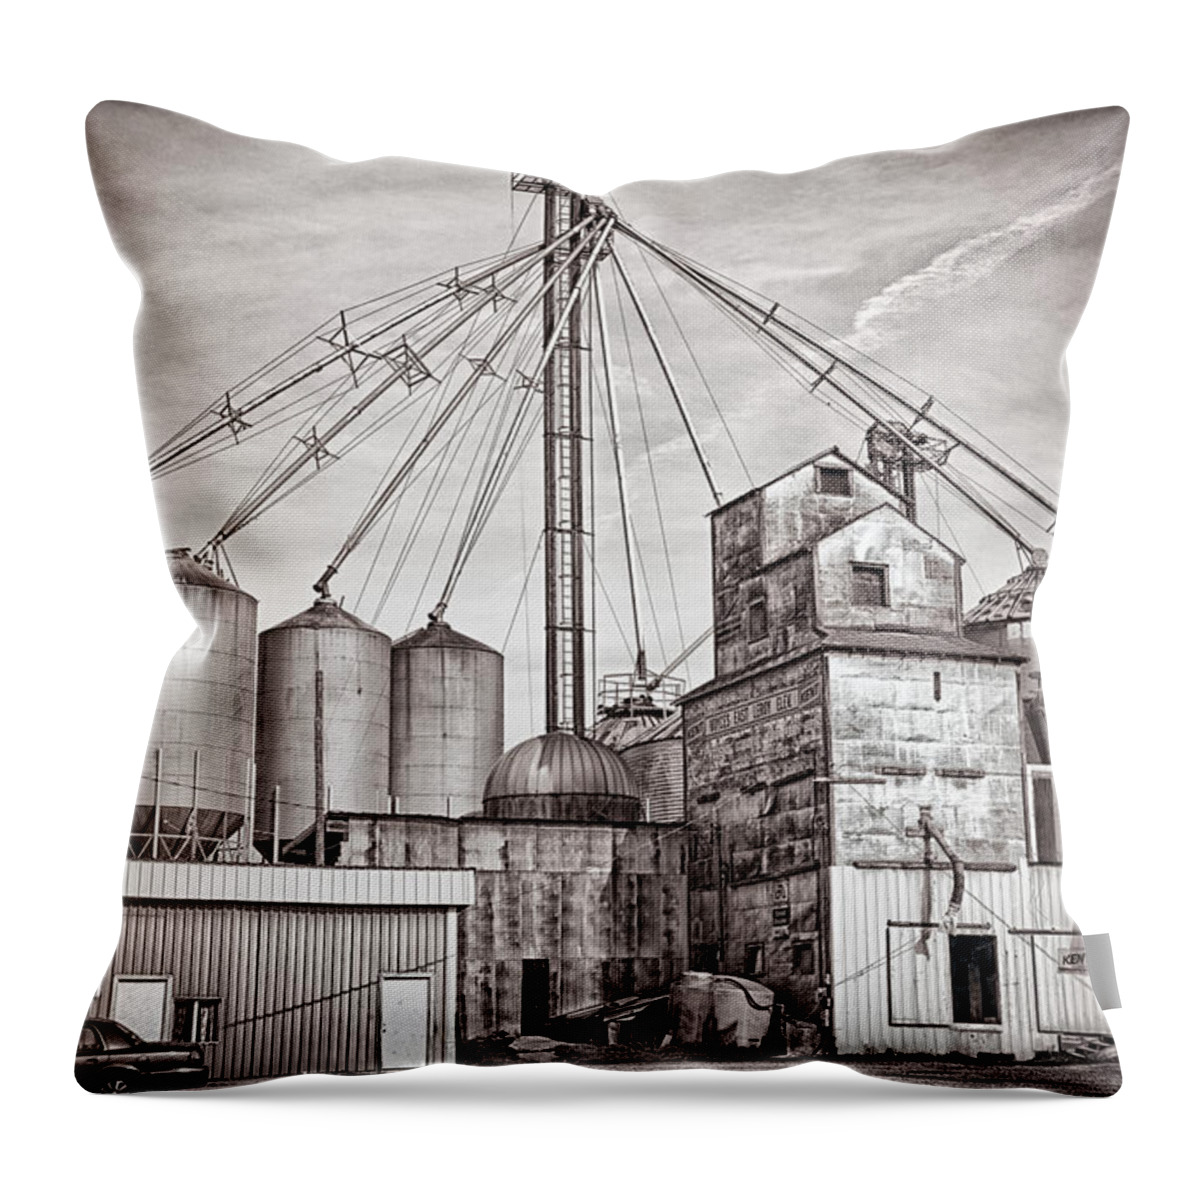 East Leroy Throw Pillow featuring the photograph Voyces Mill by Sennie Pierson